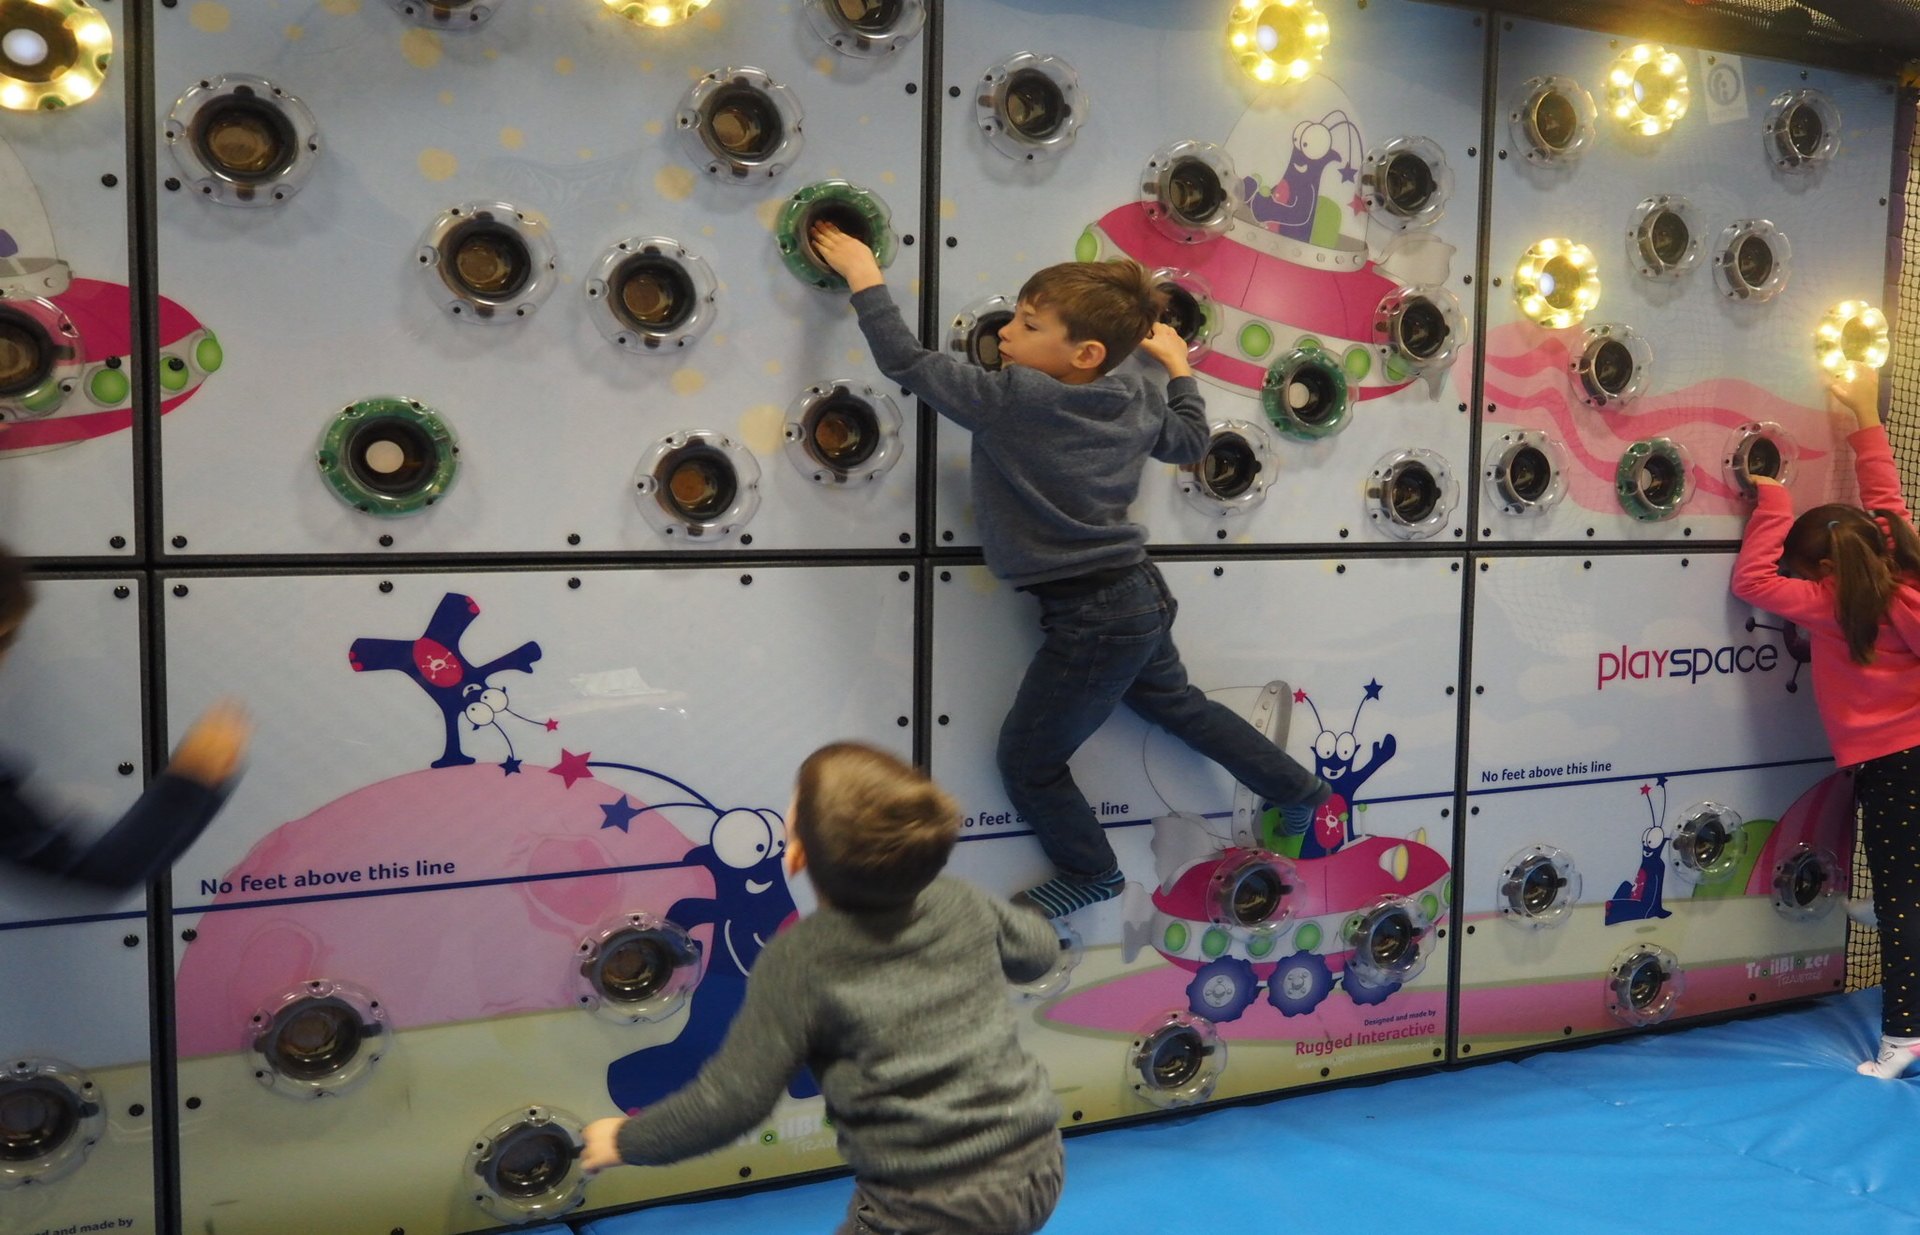 Challenging and Interactive Climbing